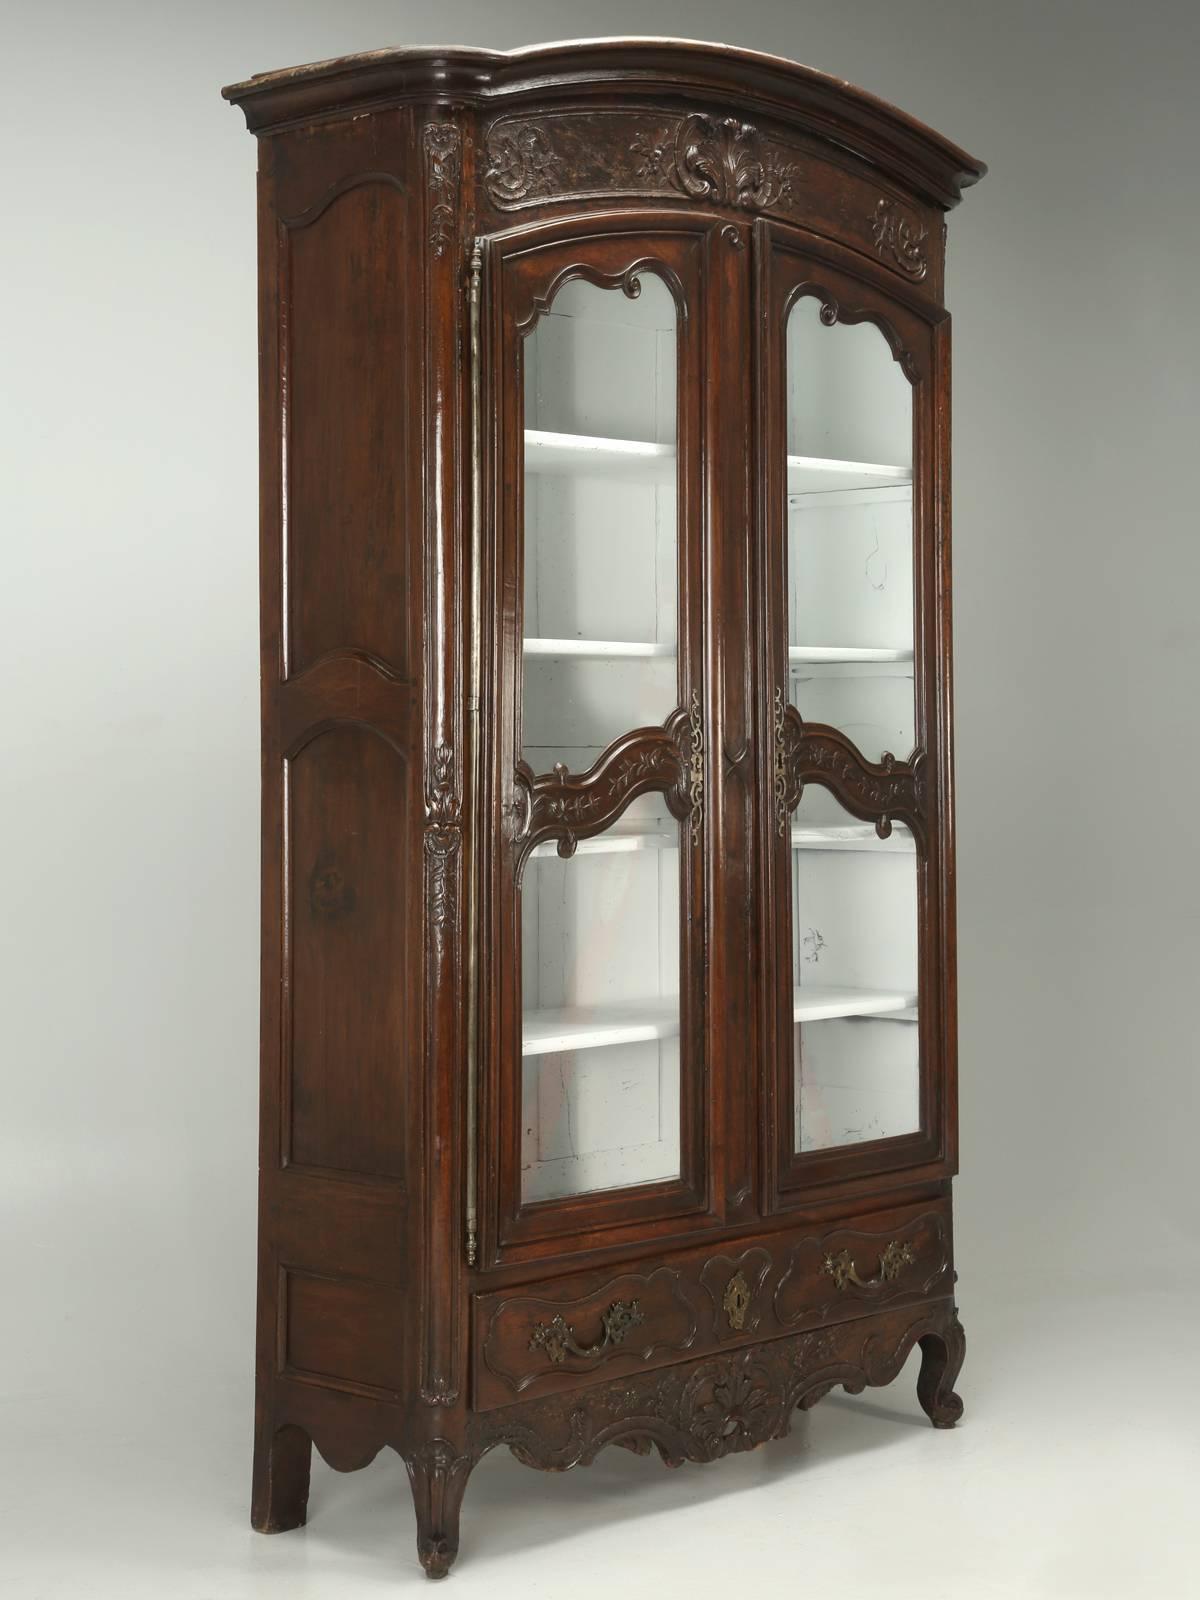 Antique French Walnut China Cabinet, Vitrine, Bookcase or Armoire, probably constructed over 200-years ago. Our Old Plank restoration department, went through the Armoires structure, from the inside out and our finishers, tried to do as little as